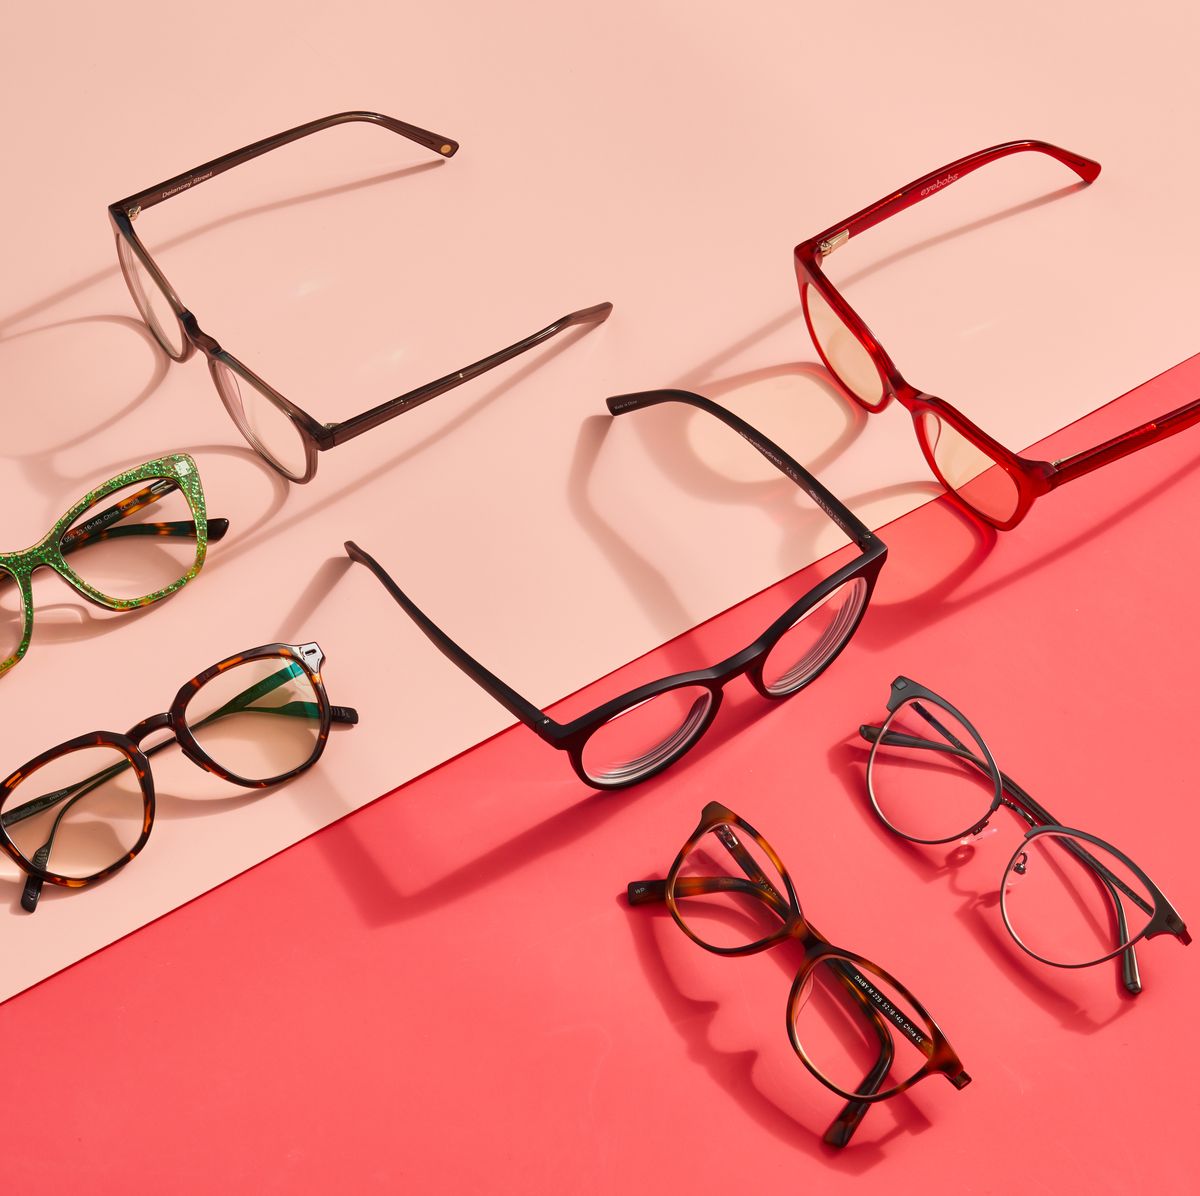 Women's Designer Glasses  Our Best Deals on the Hottest Styles